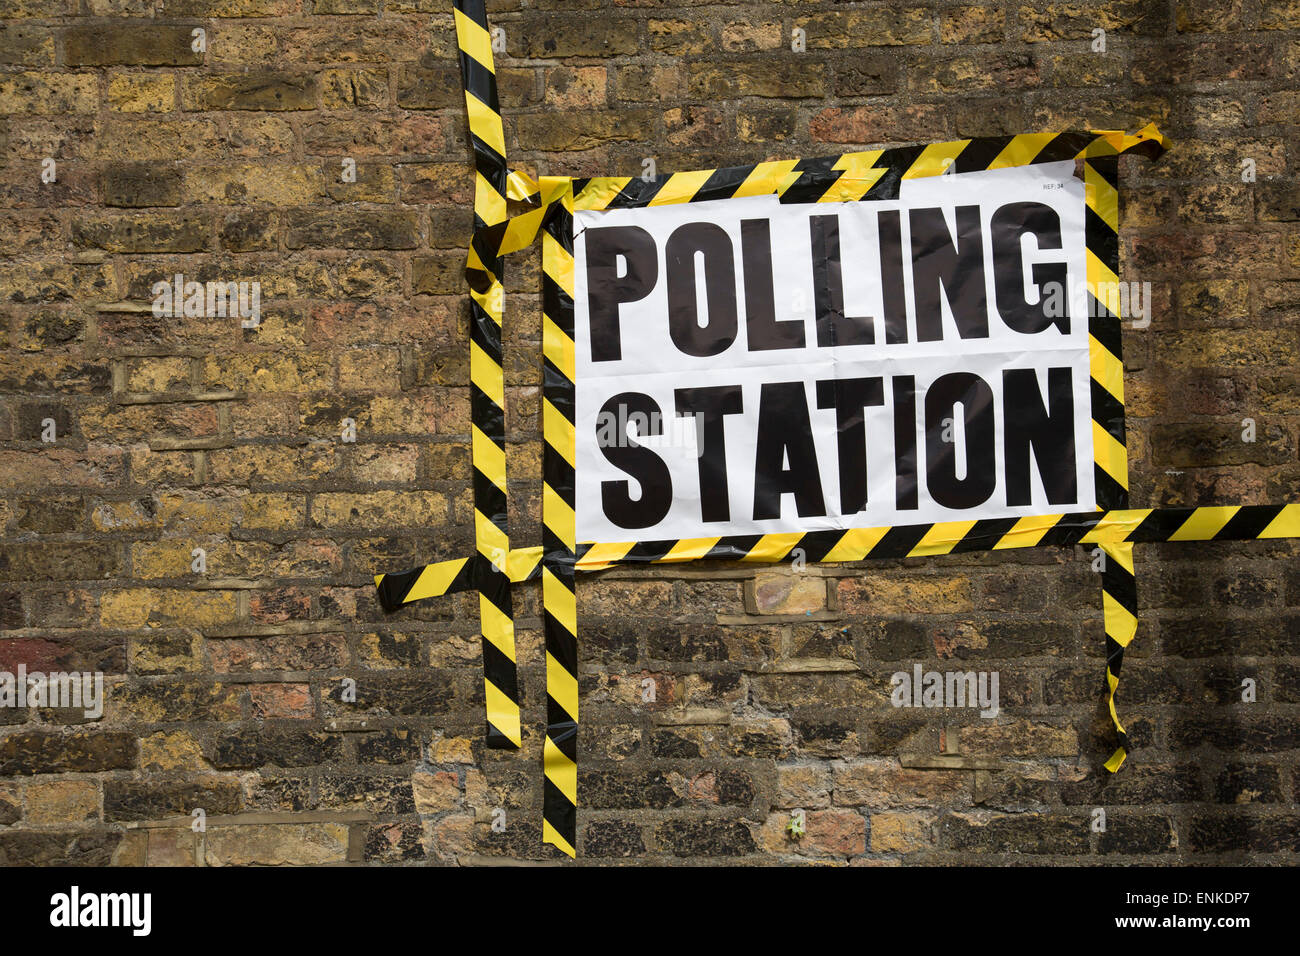 London, UK. Thursday 7th May 2015. Polling station at John Orwell Leisure Centre in the constituency of  Poplar and Limehouse in East London on the day of the general election. This is a Labour Party seat, although this electin is set to be one of the most hotly contested in a generation. Stock Photo